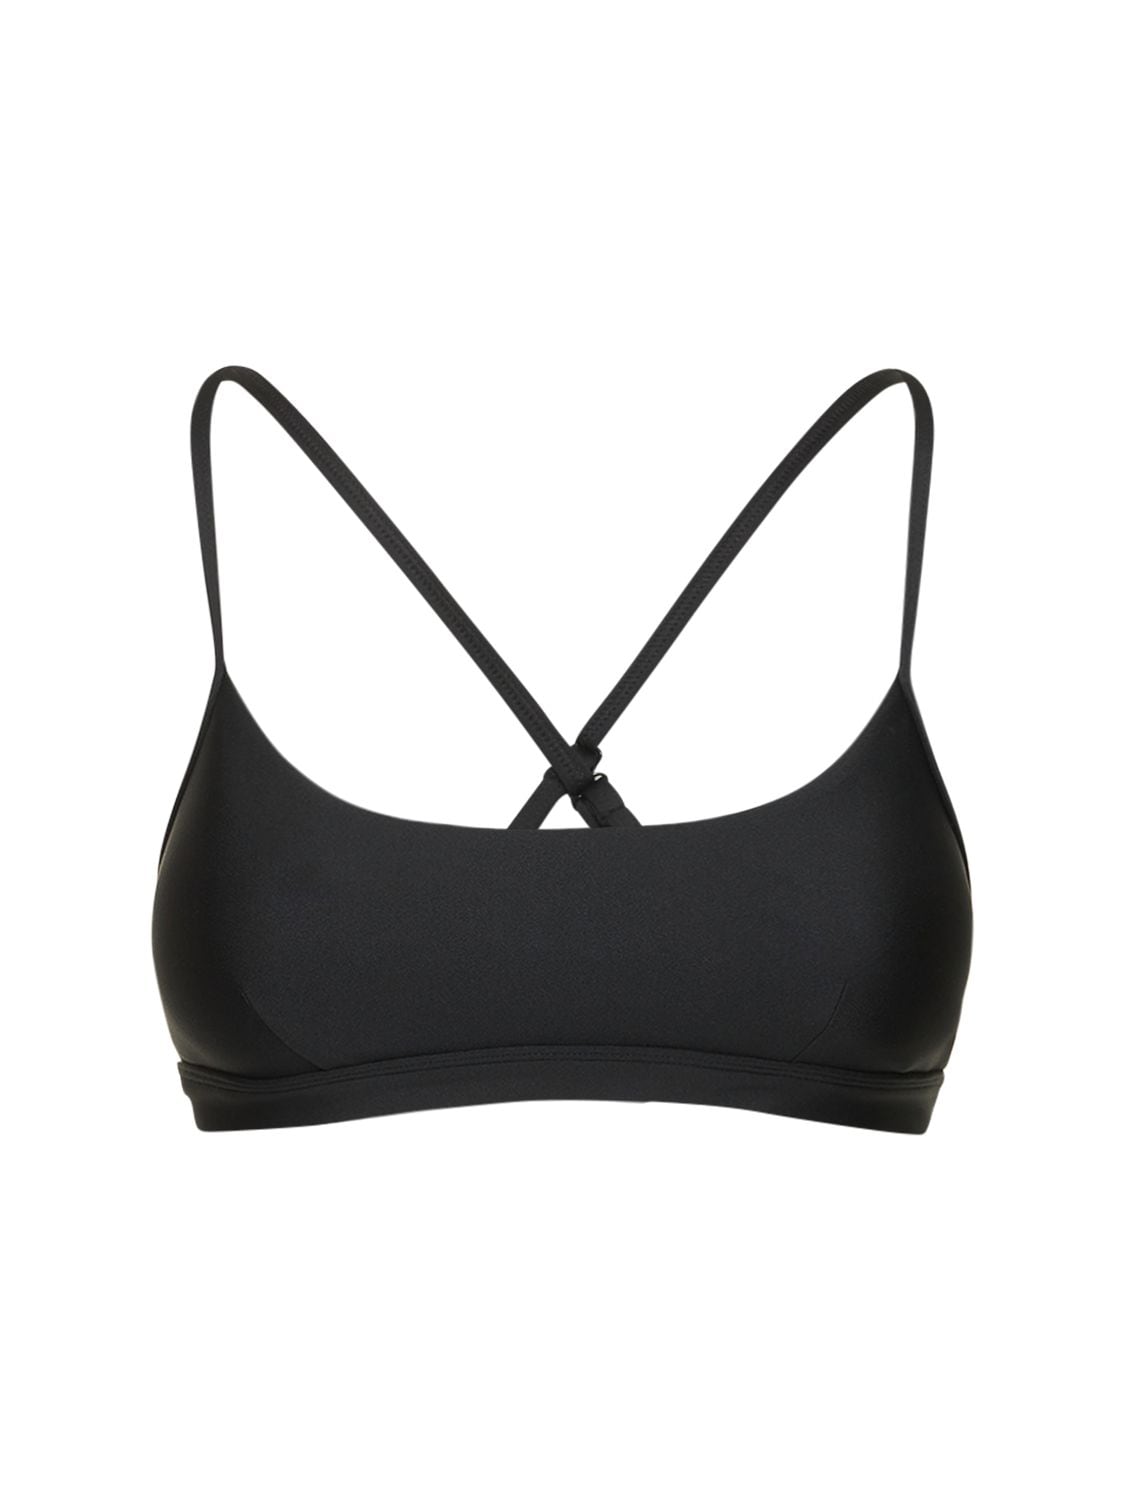 ALO YOGA AIRLIFT INTRIGUE BRA